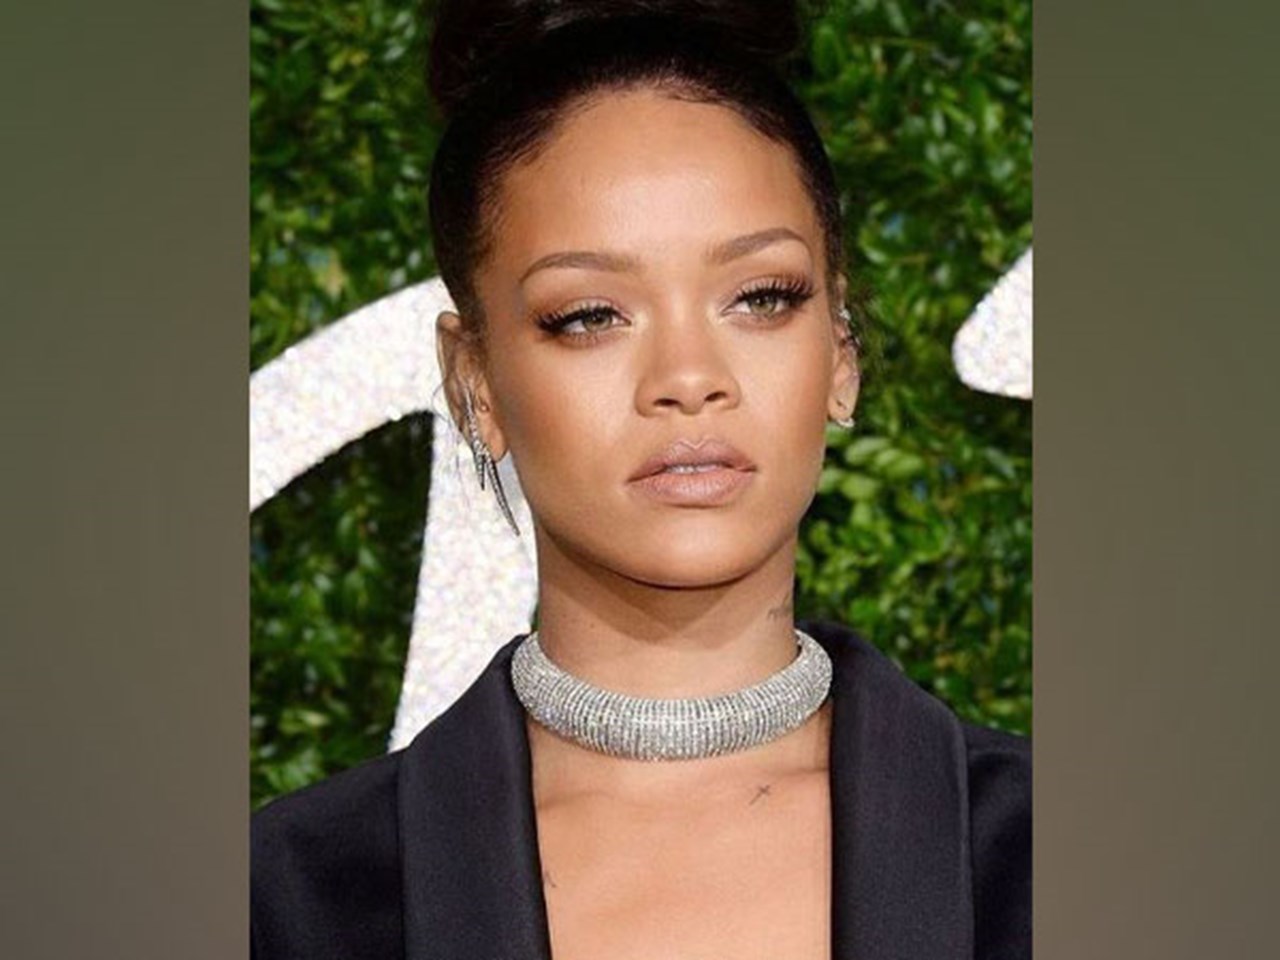 Rihanna Savage x Fenty - latest: Fans say Johnny Depp and Rihanna are  'over' amid controversial appearance in fashion show